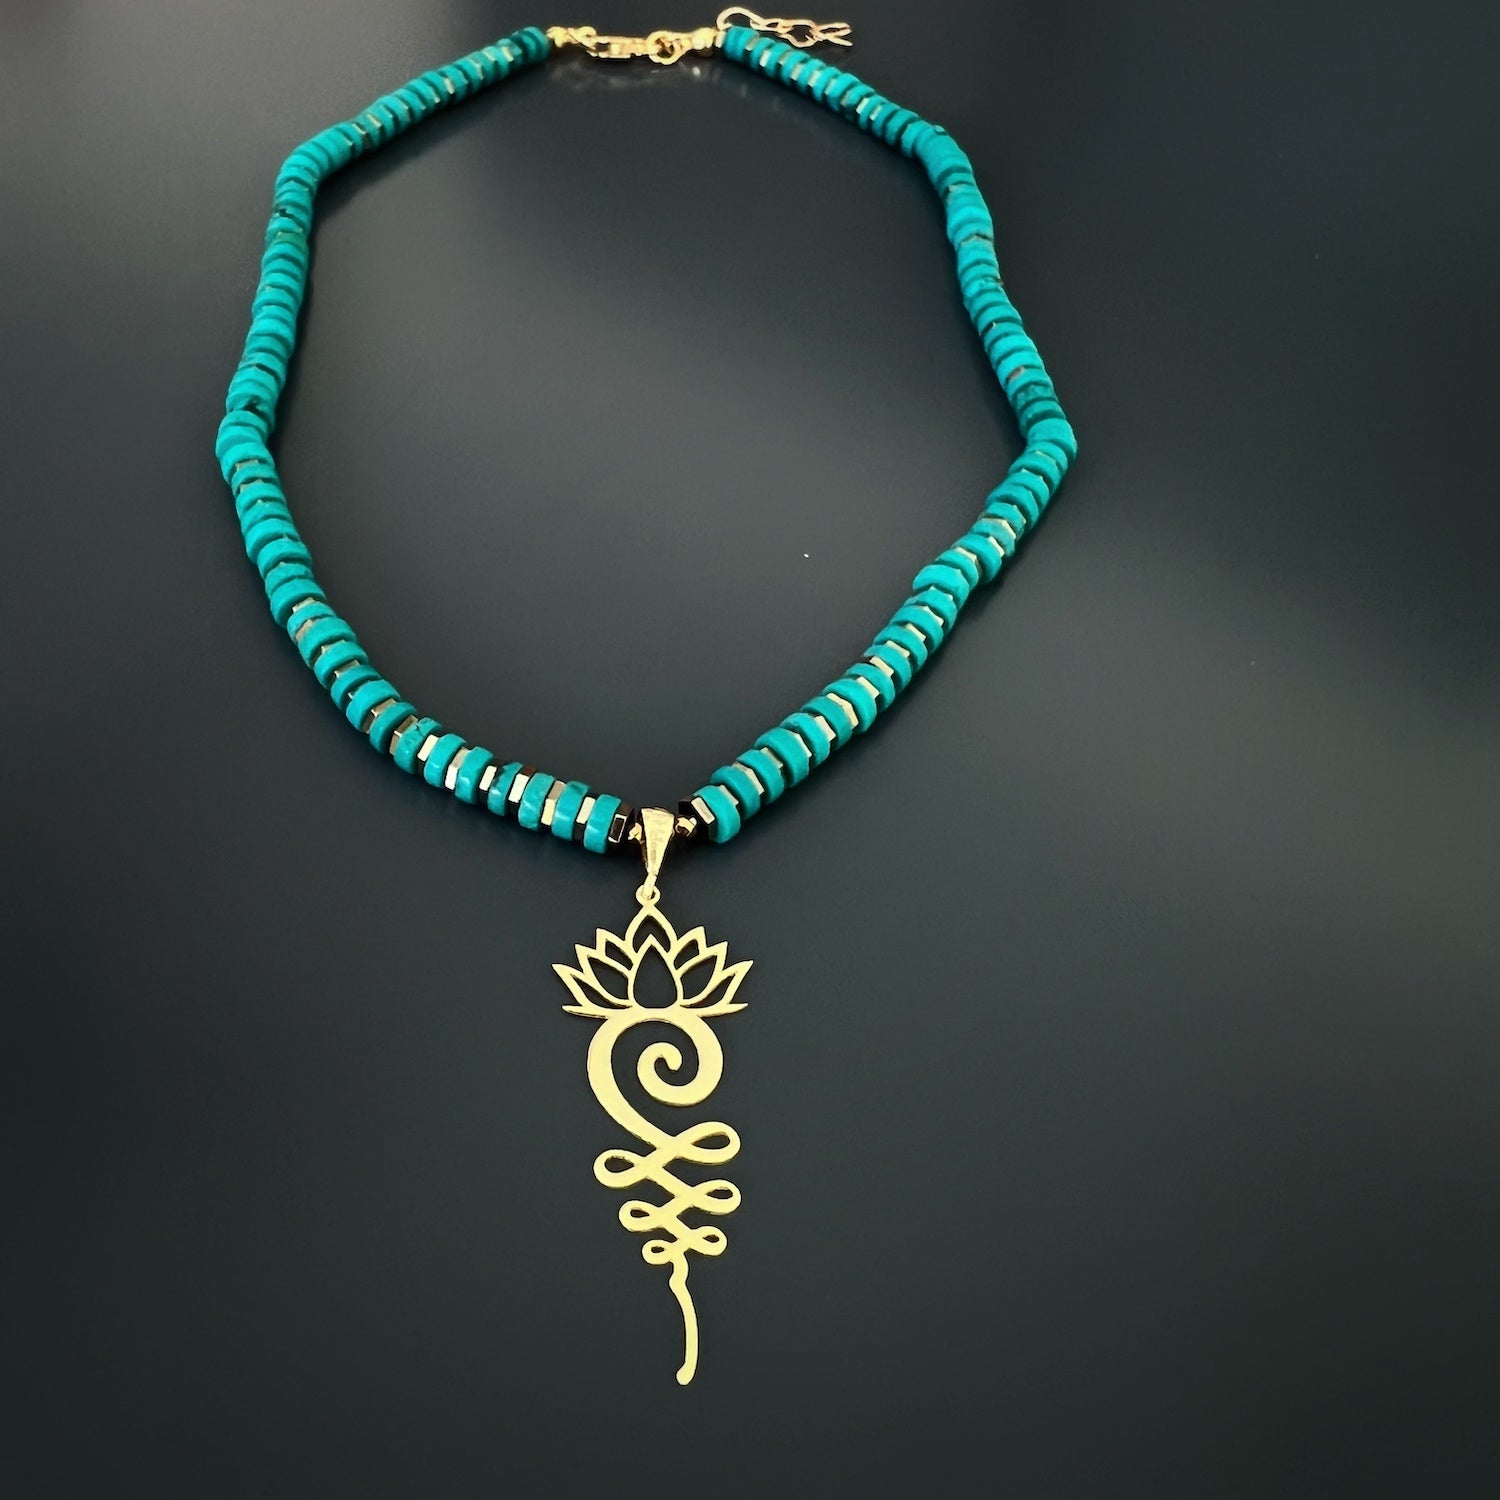 The Turquoise Unalome Serenity Necklace, showcasing its unique design